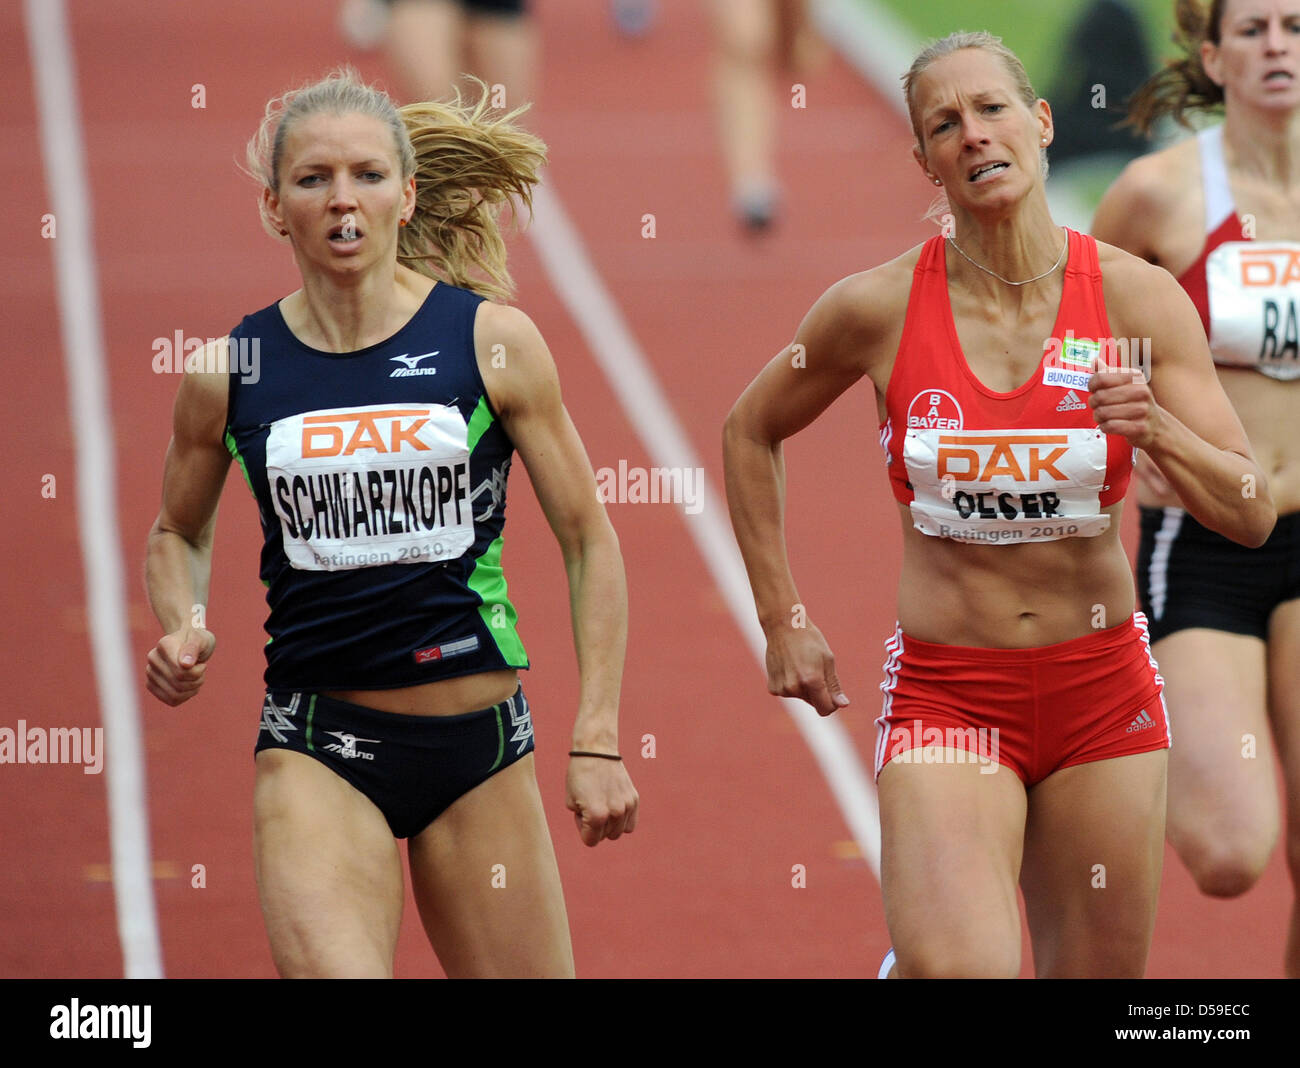 German heptathletes Lilli Schwarzkopf (L) and Jennifer Oeser at the finish of the 800m at the Erdgas Meeting, the fourth leg of the 2010 IAAF Combined Events Challenge in Ratingen, Germany, 20 June 2010. Jennifer Oeser takes the win. Photo: Jörg Carstensen Stock Photo